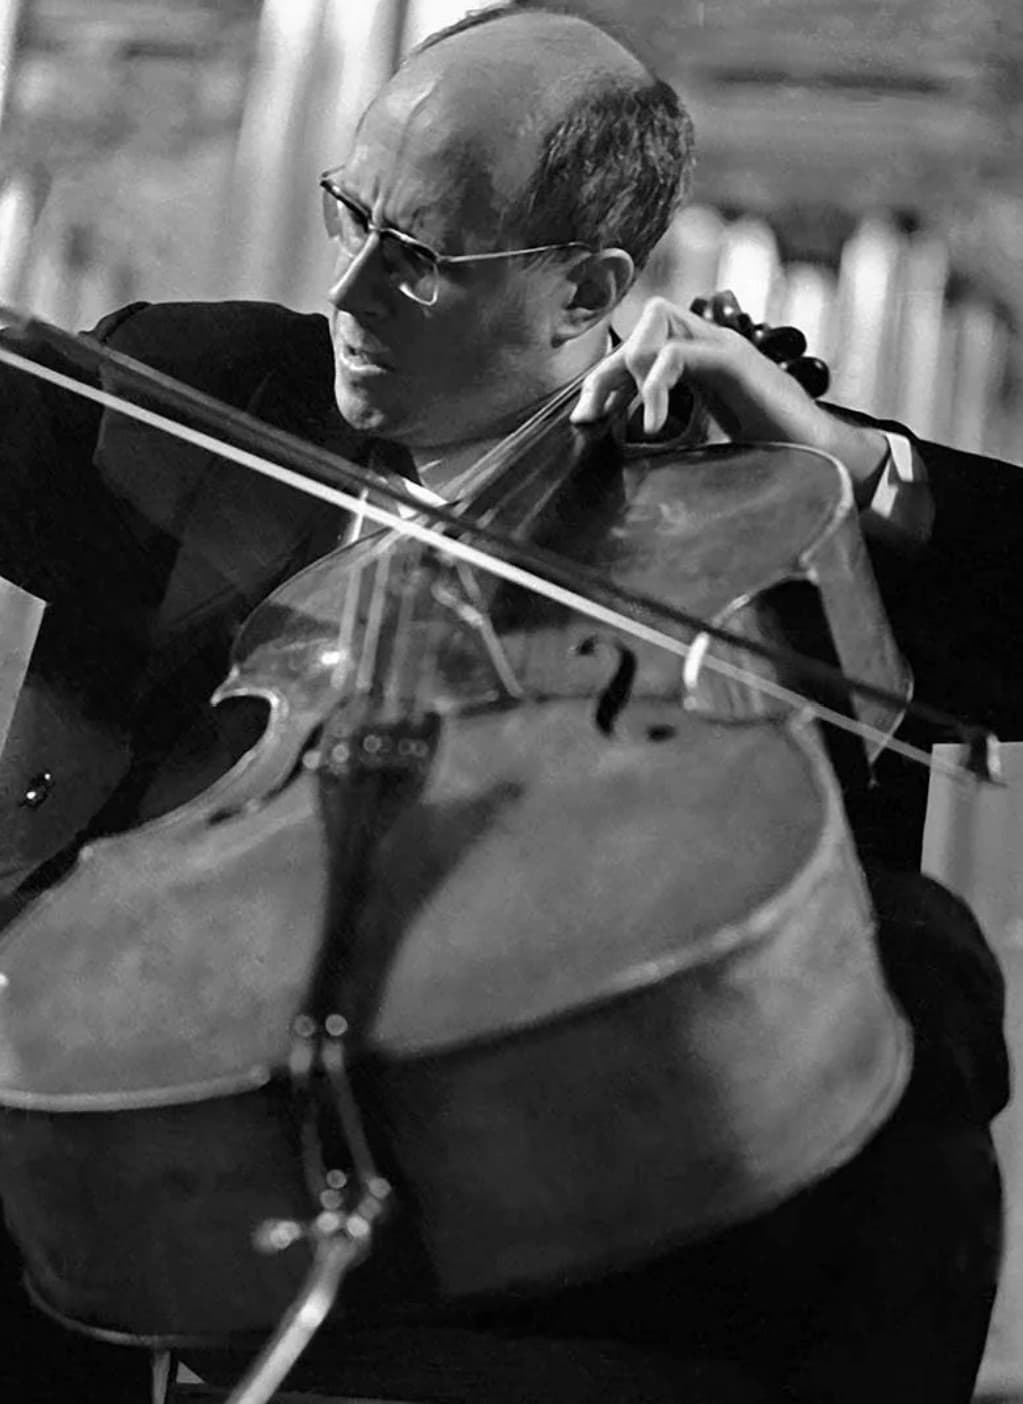 Mstislav Rostropovich playing the Duport cello